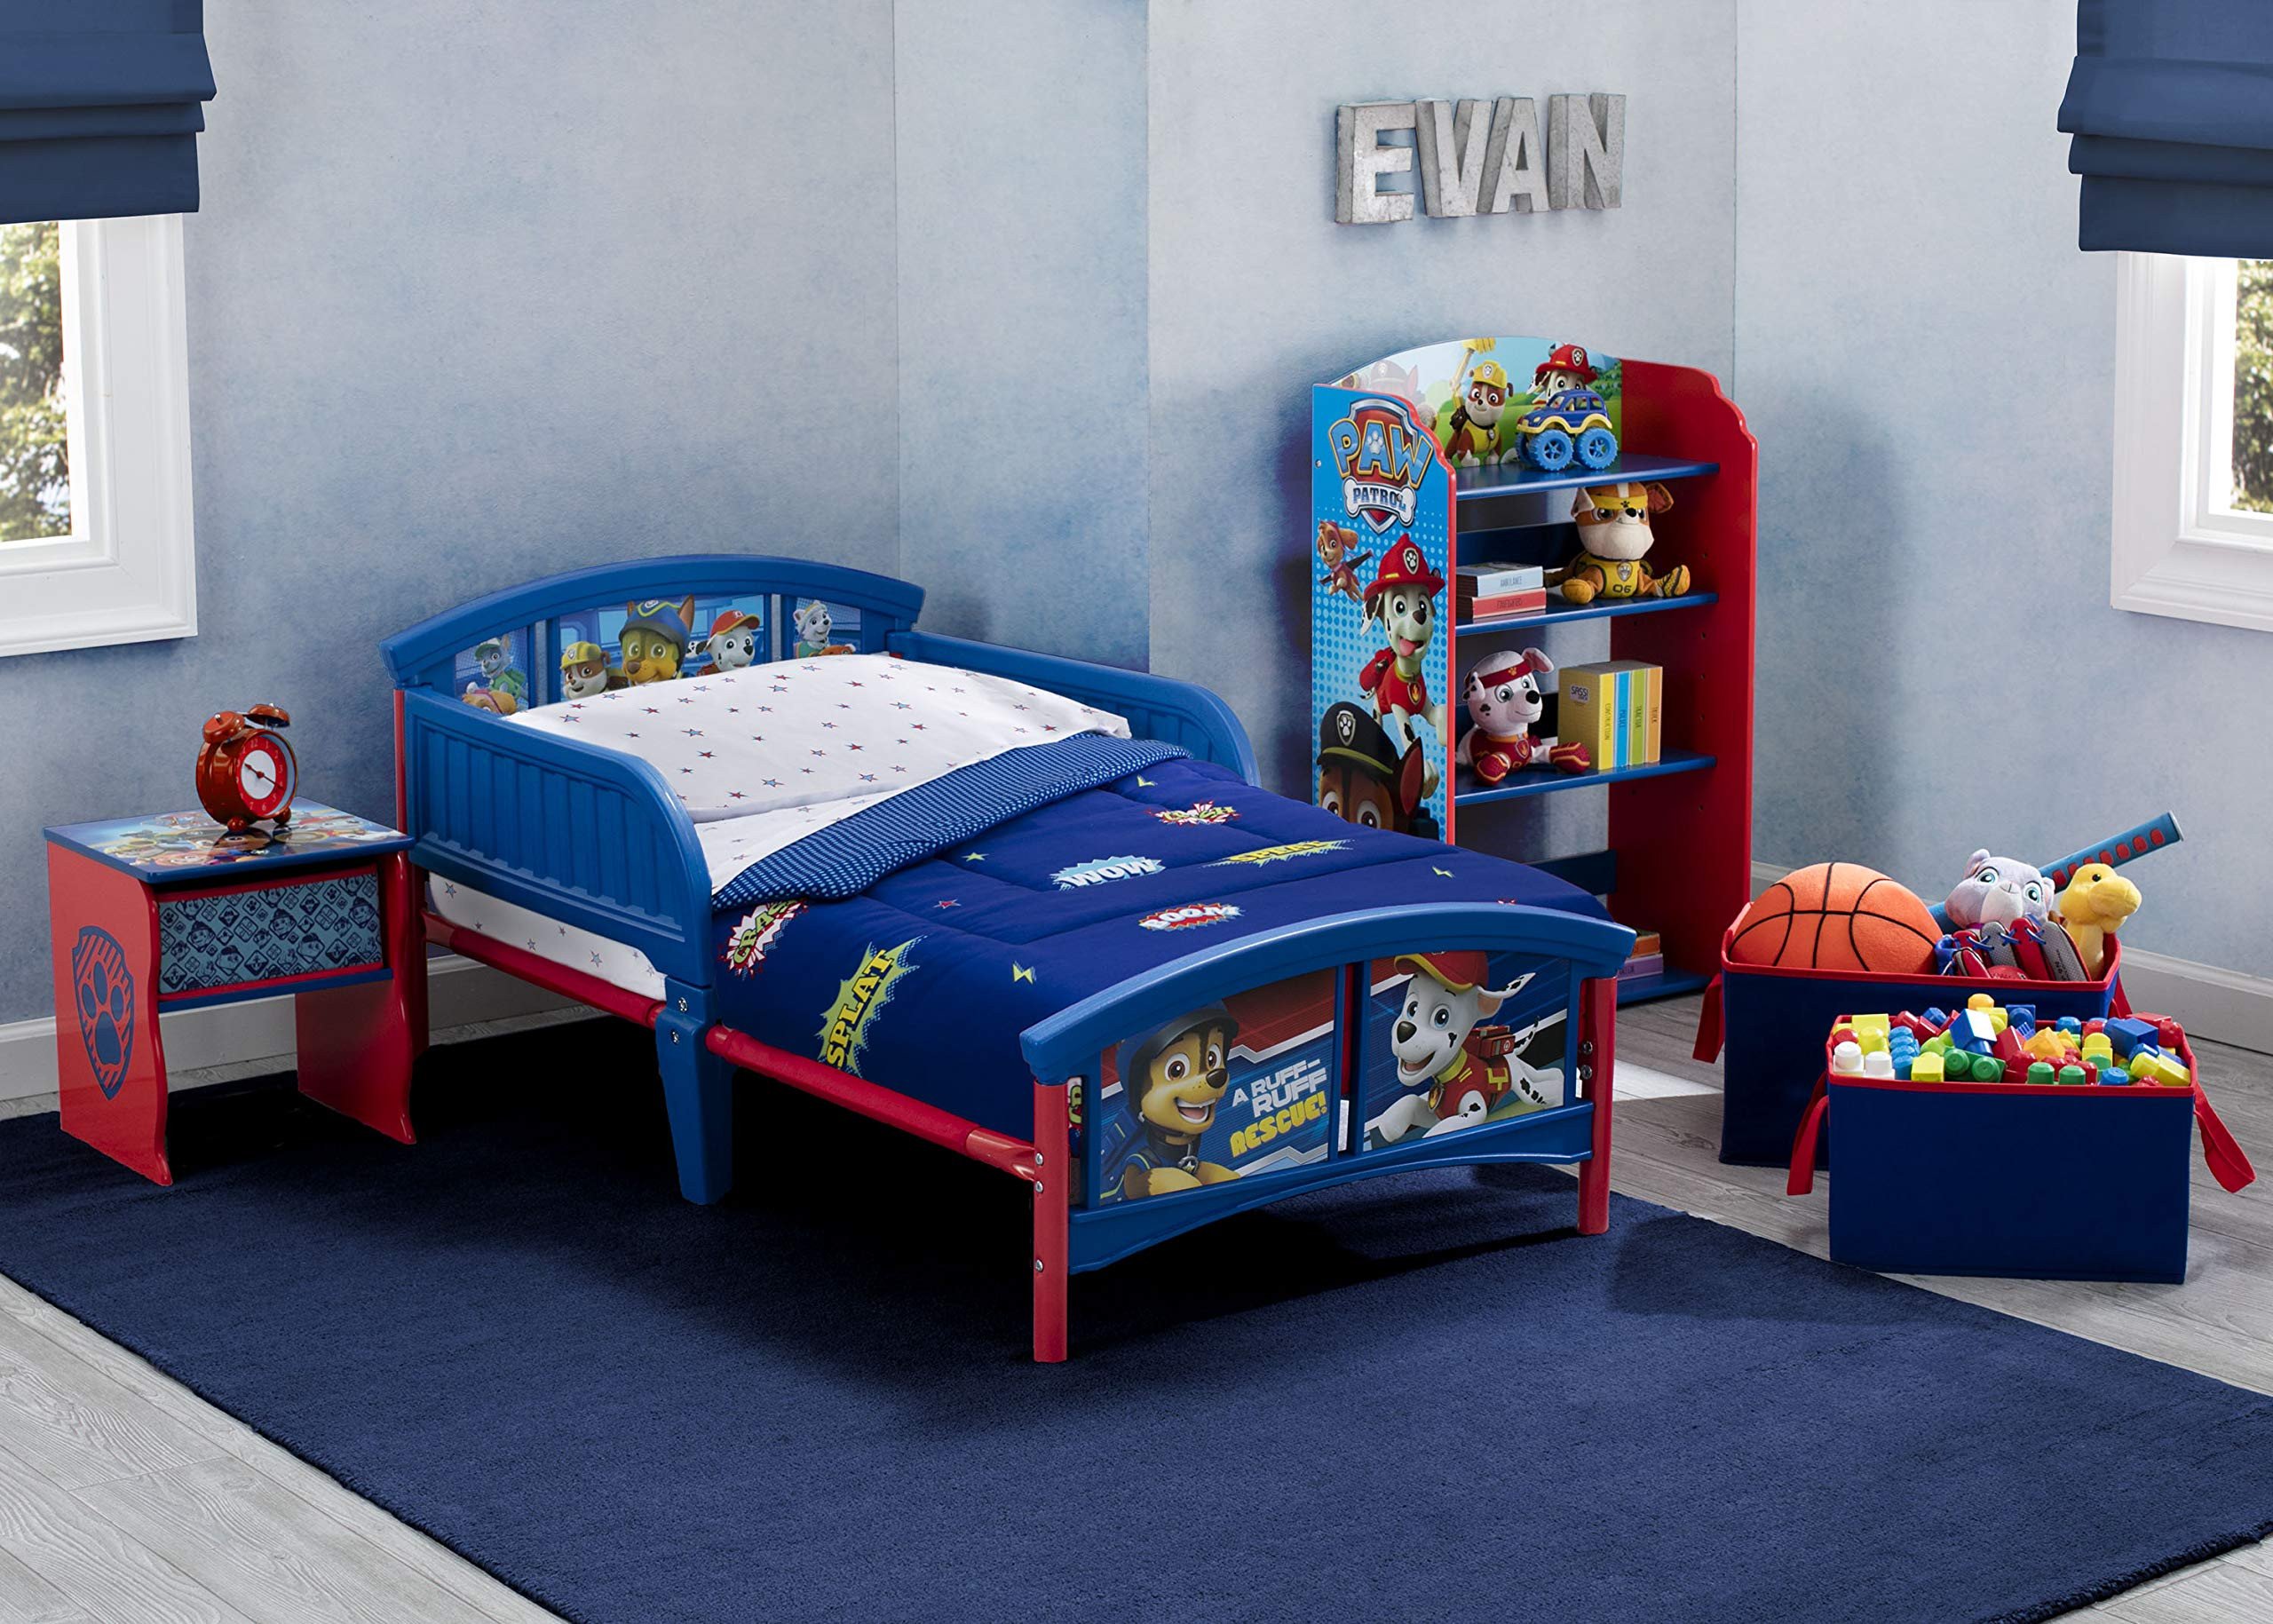 Decorating Ideas For Paw Patrol Bedroom